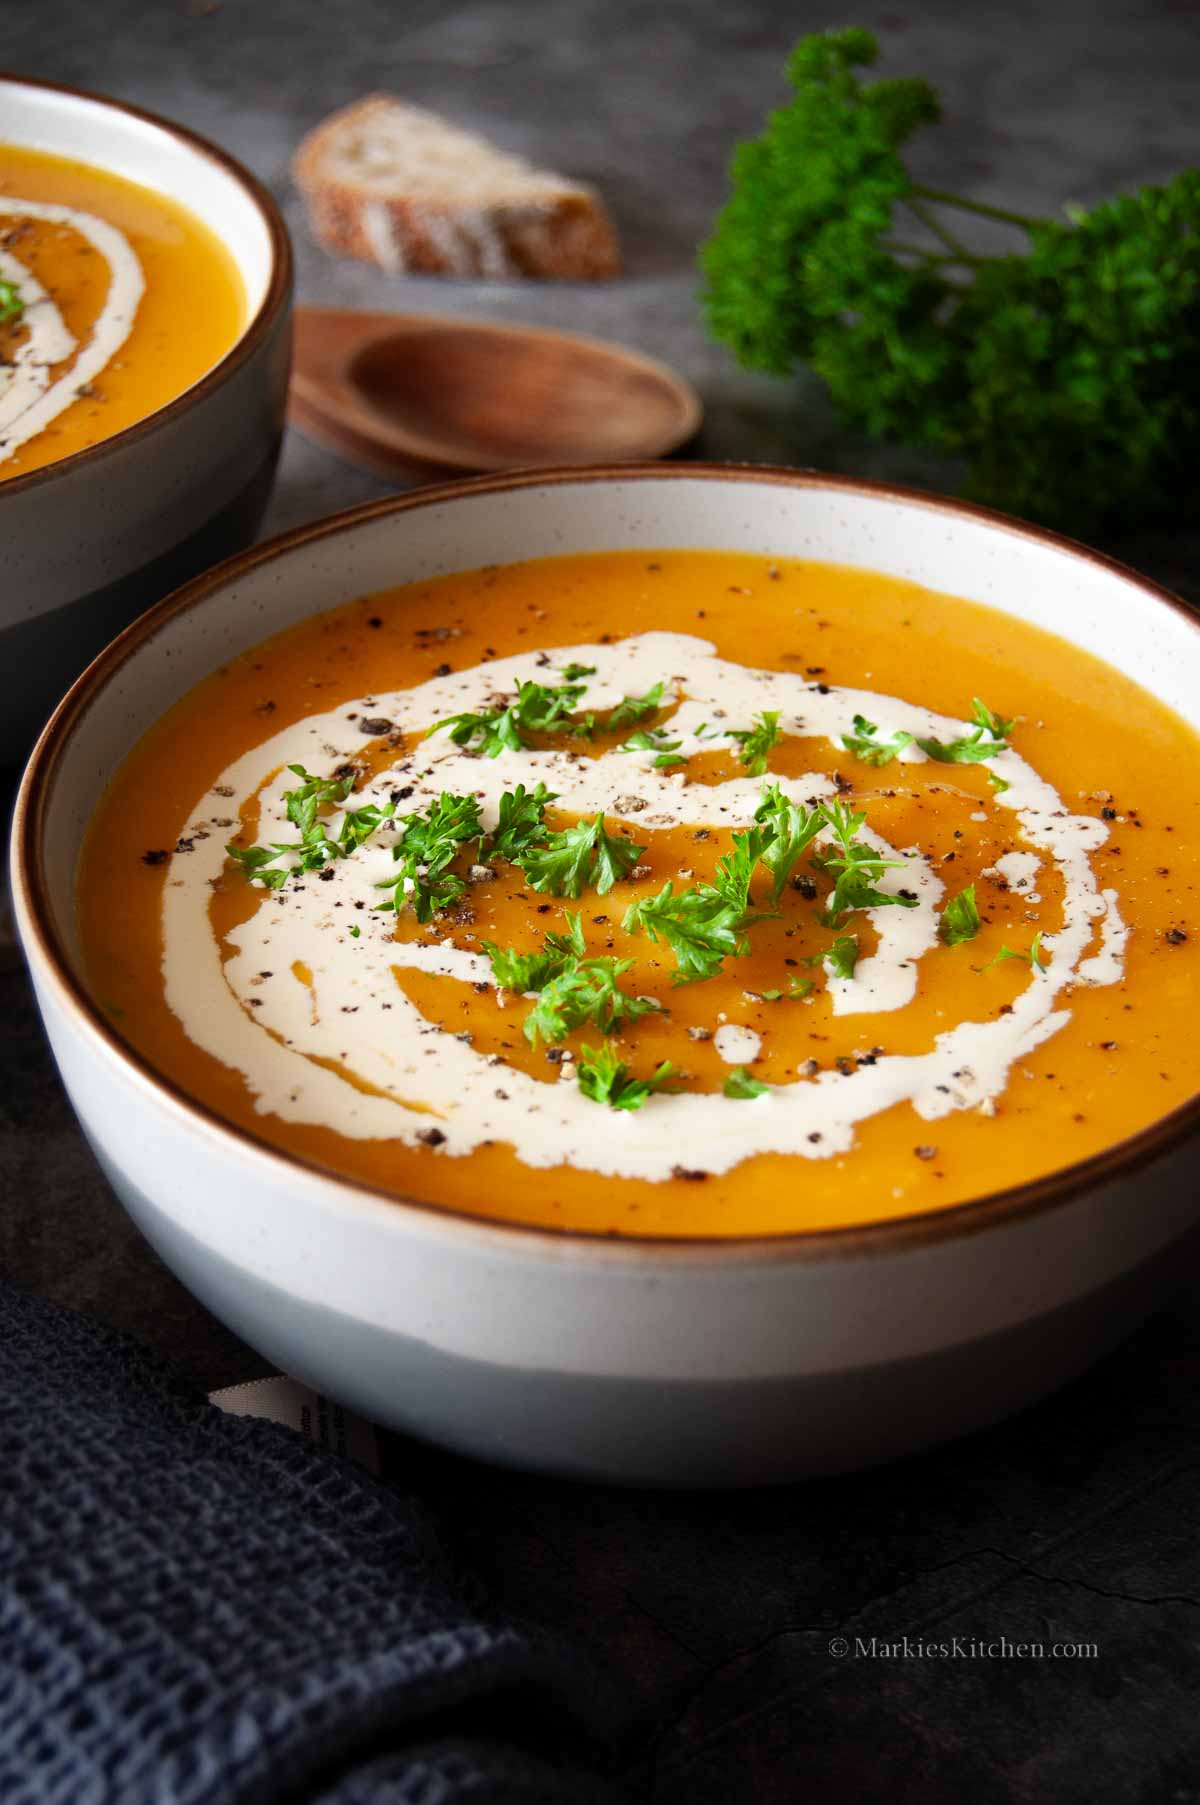 A photo of two bowls with pumpkin soup in grey bowls. The soup is garnished with a drizzle of cream, black pepper and chopped parsley.